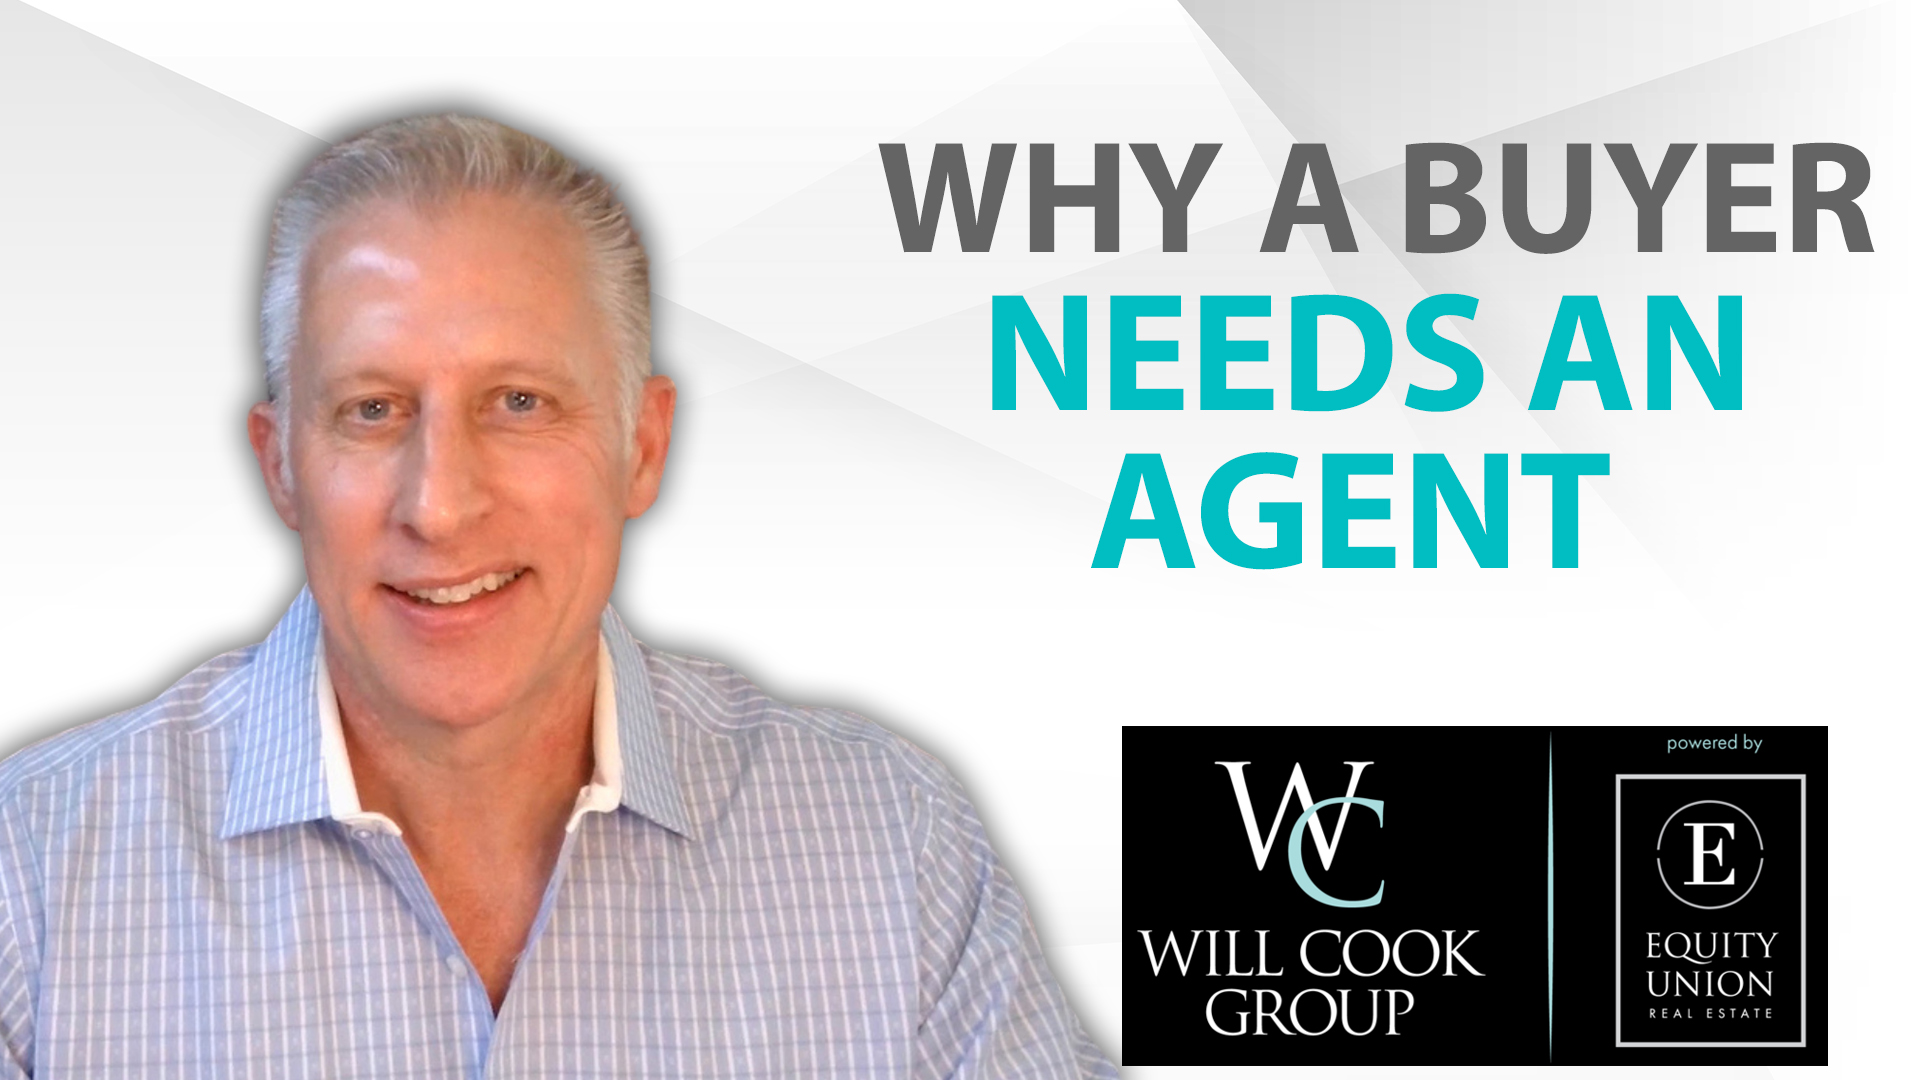 Key Benefits to Having a Buyer’s Agent